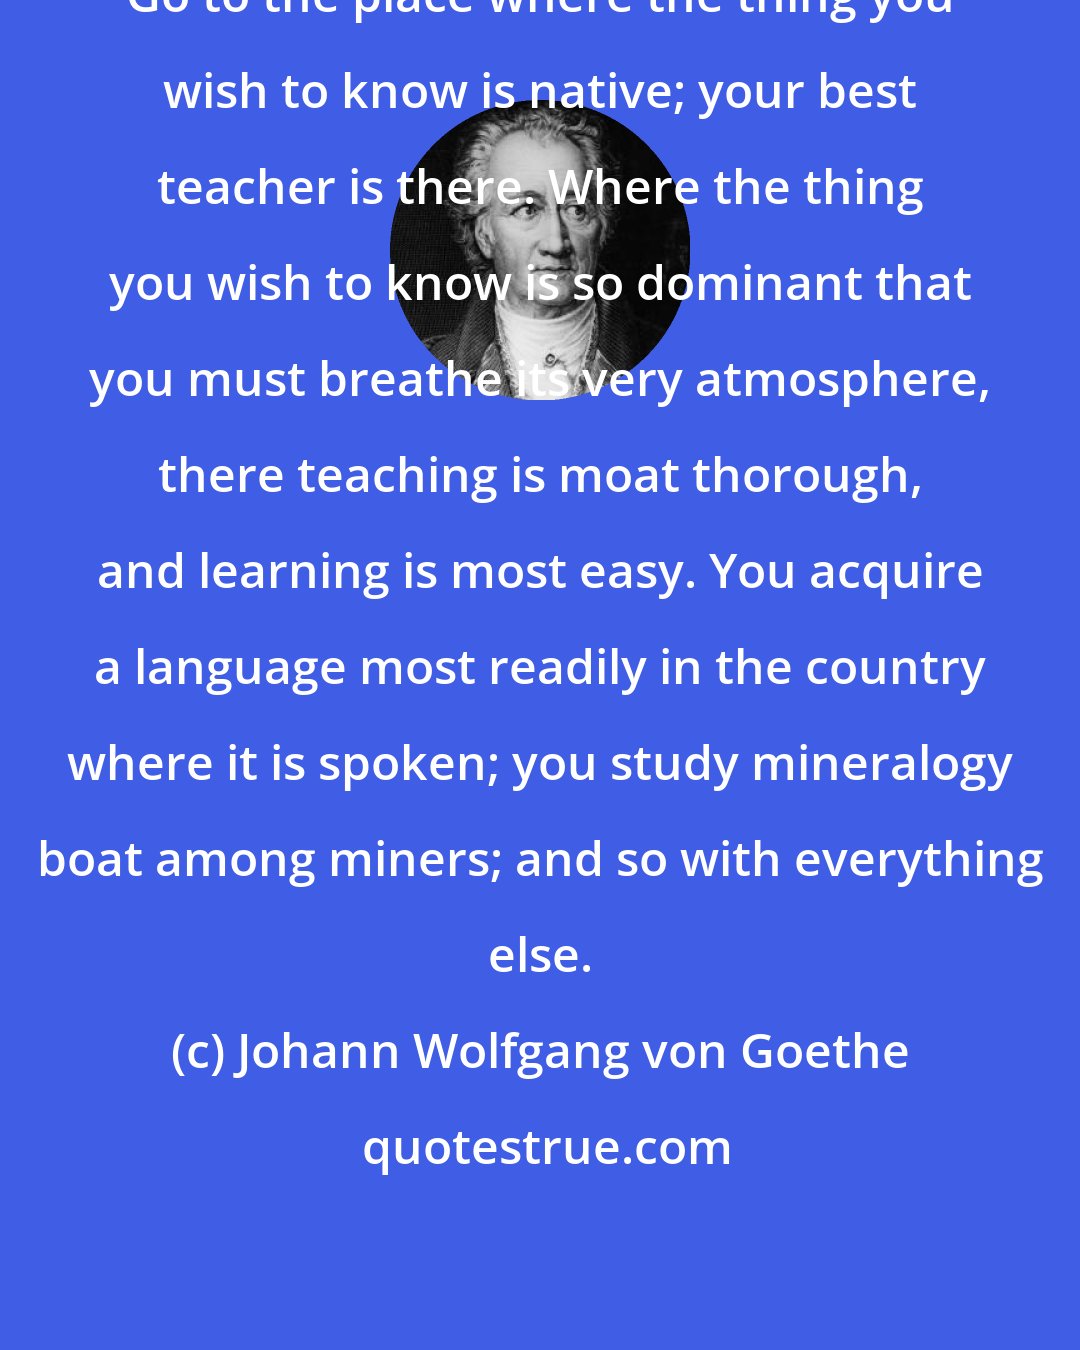 Johann Wolfgang von Goethe: Go to the place where the thing you wish to know is native; your best teacher is there. Where the thing you wish to know is so dominant that you must breathe its very atmosphere, there teaching is moat thorough, and learning is most easy. You acquire a language most readily in the country where it is spoken; you study mineralogy boat among miners; and so with everything else.